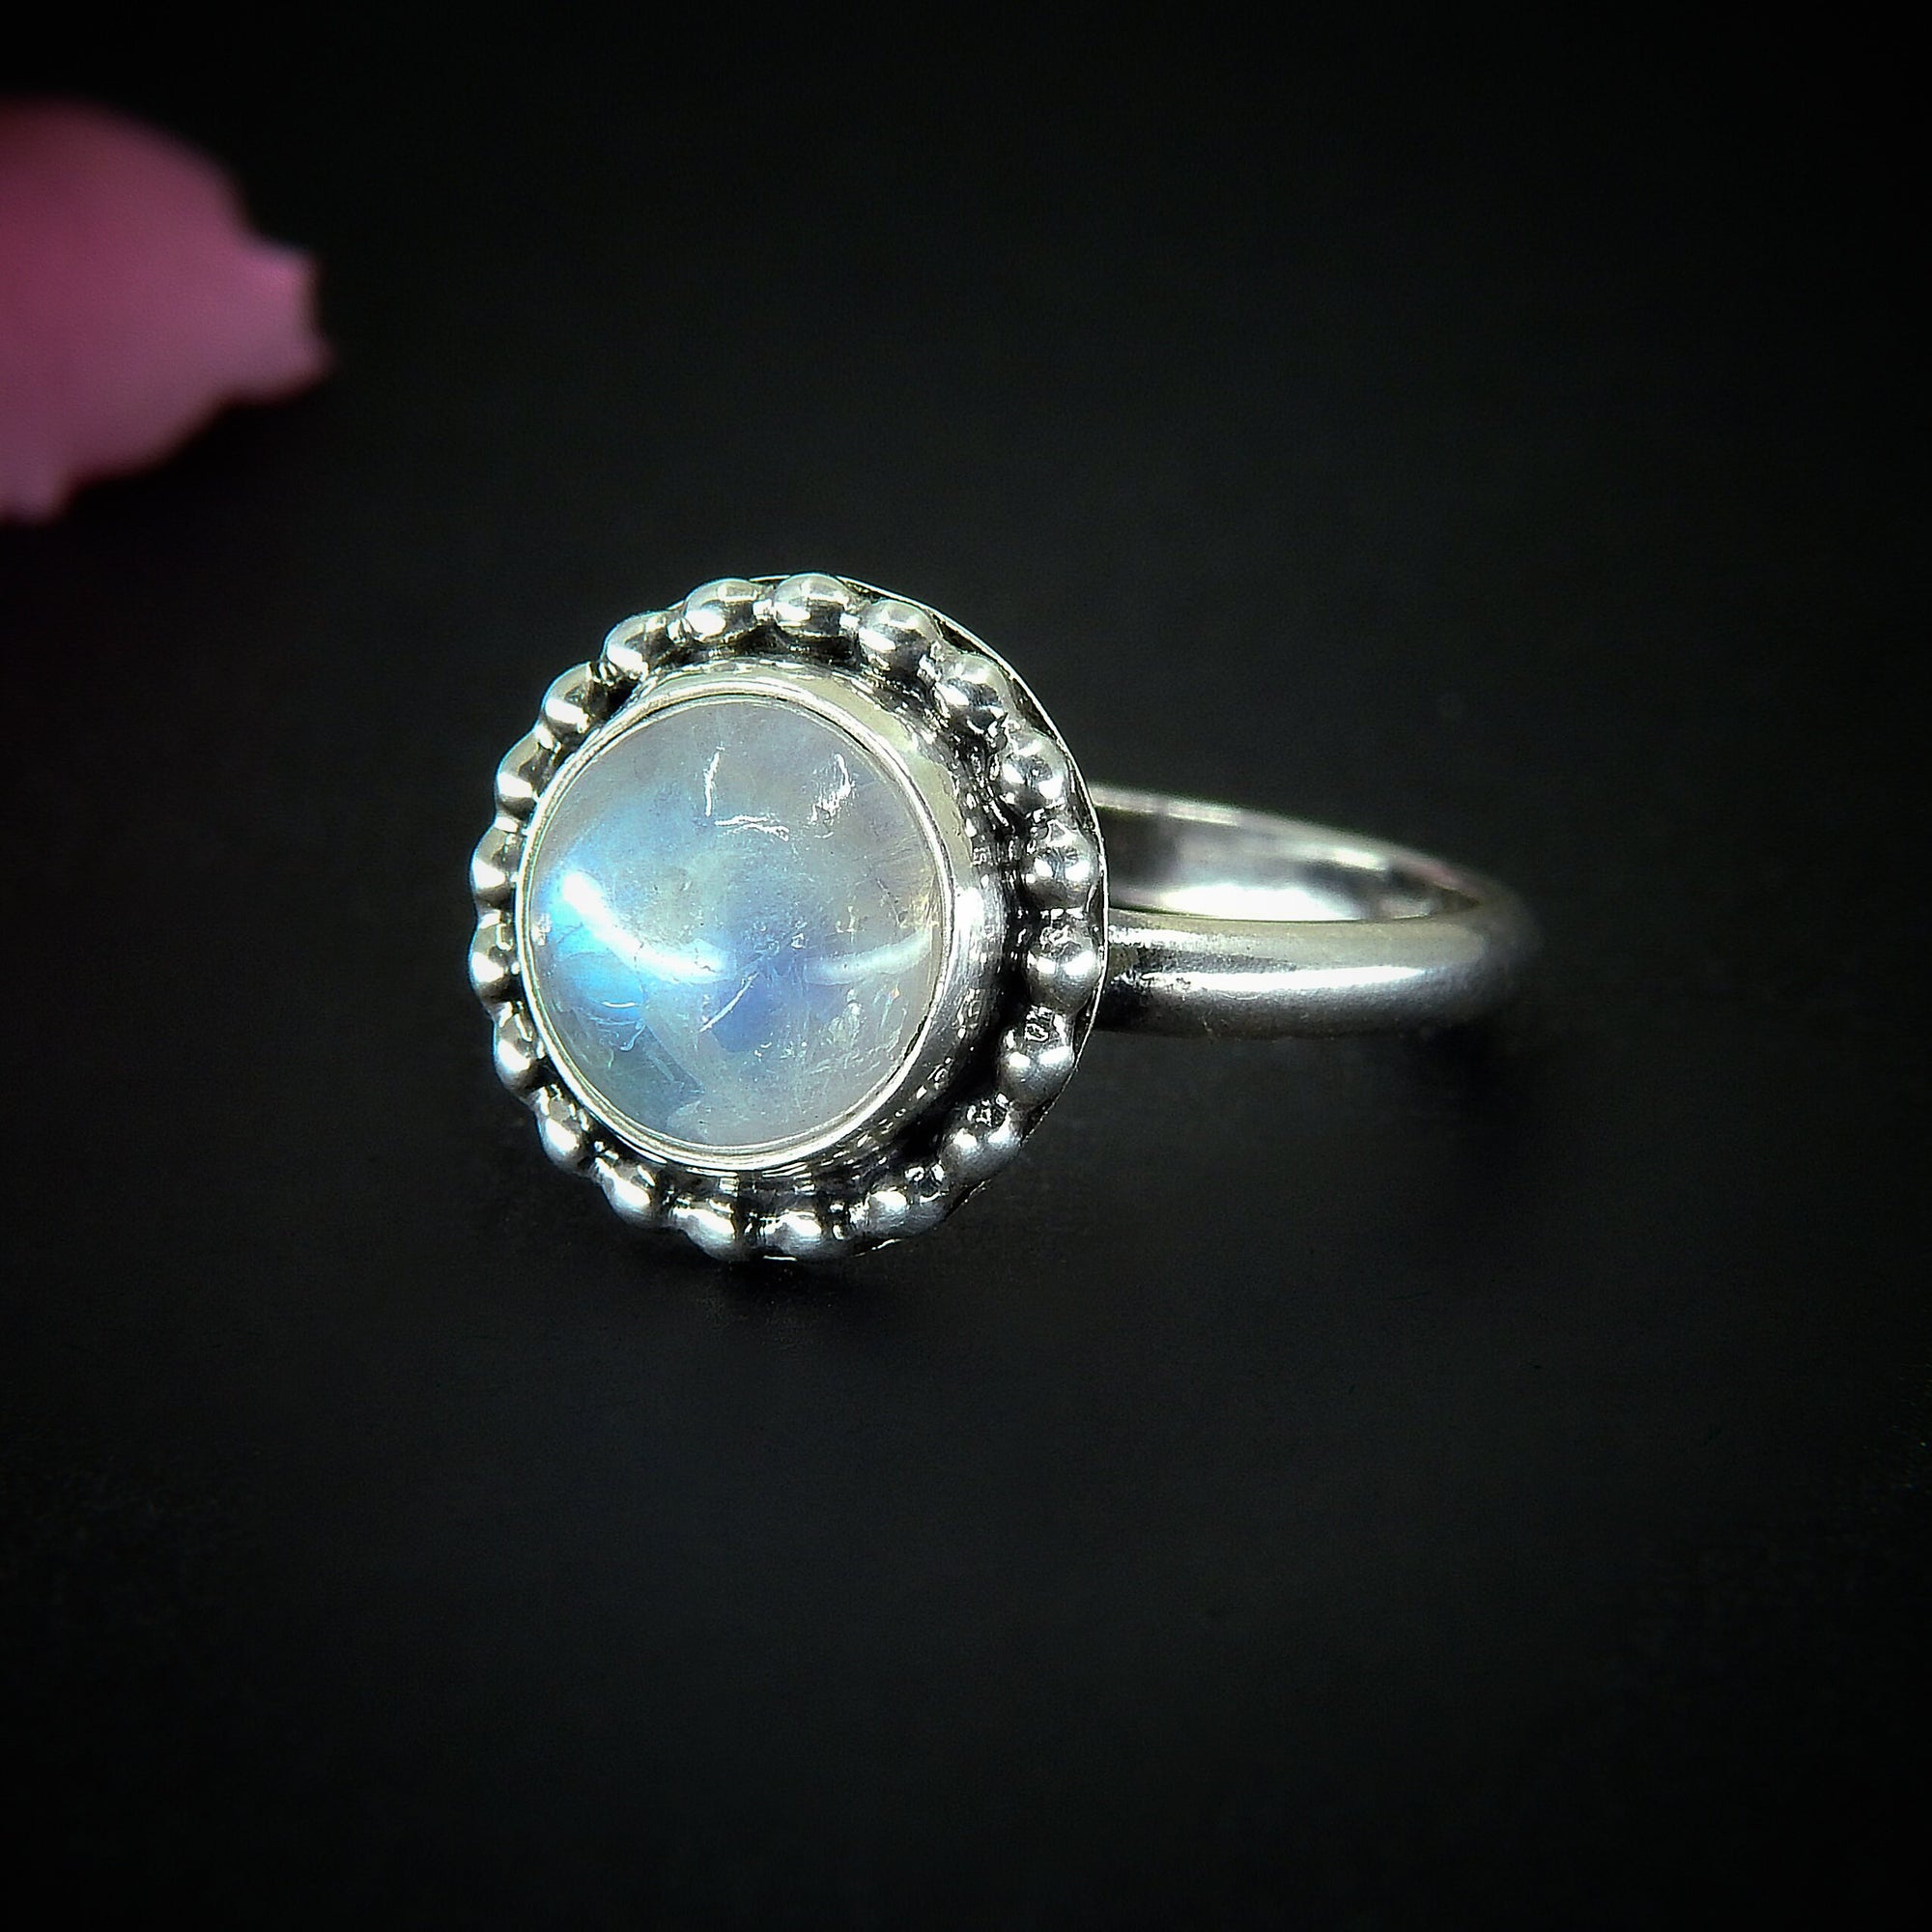 Moonstone Ring - Size 8 - Sterling Silver - Rainbow Moonstone Statement Ring - Blue Flash Moonstone Jewellery, Round Moonstone Ring OOAK